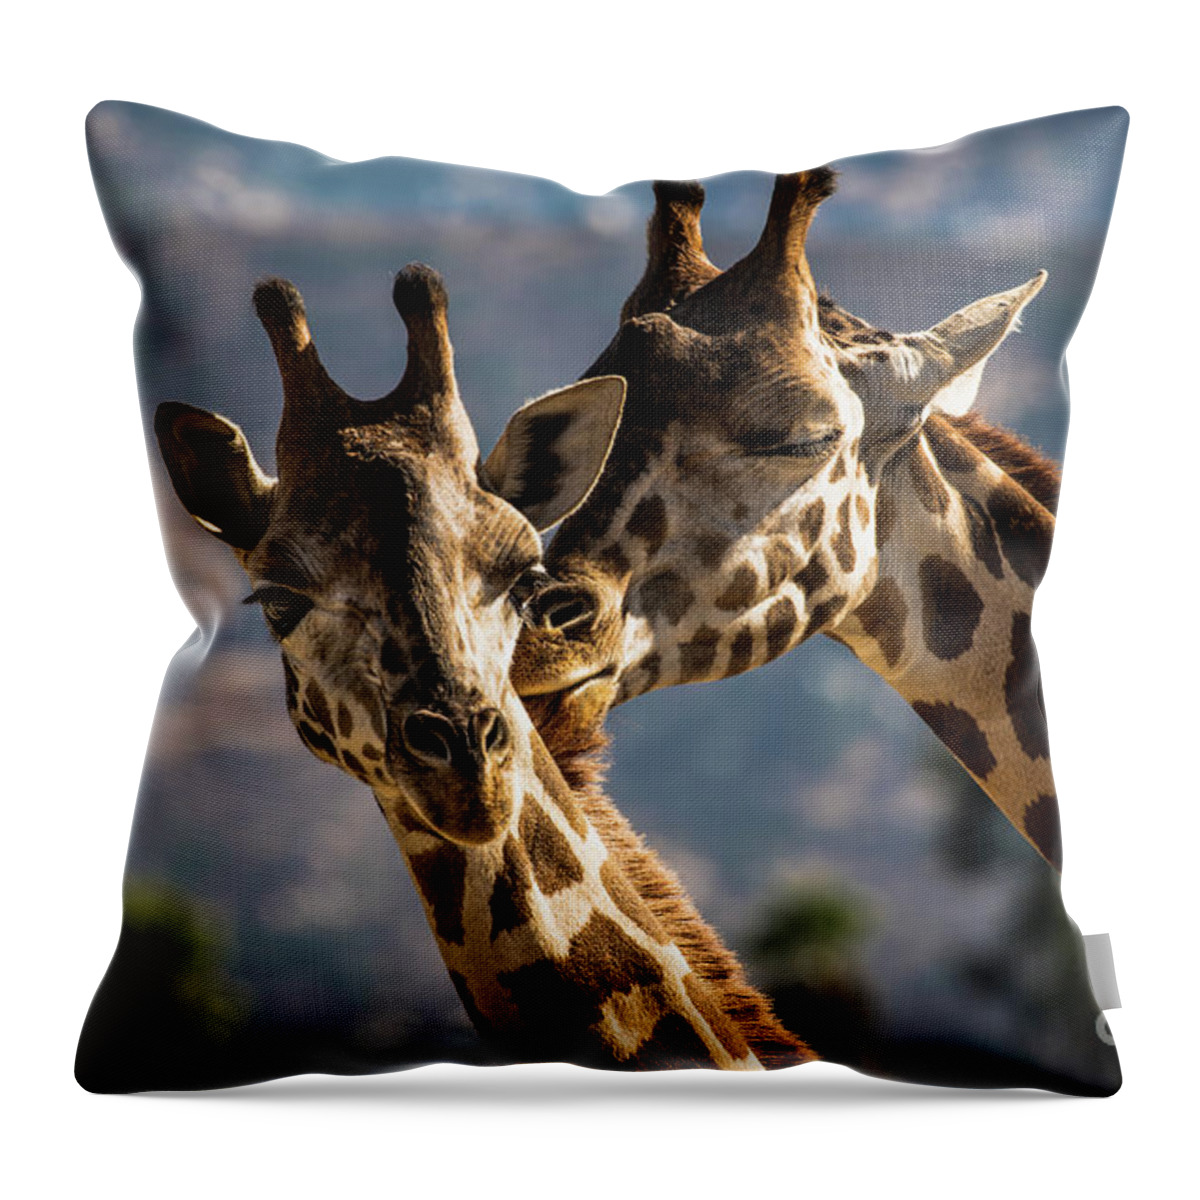  Throw Pillow featuring the photograph A Romantic Moment by Julian Starks